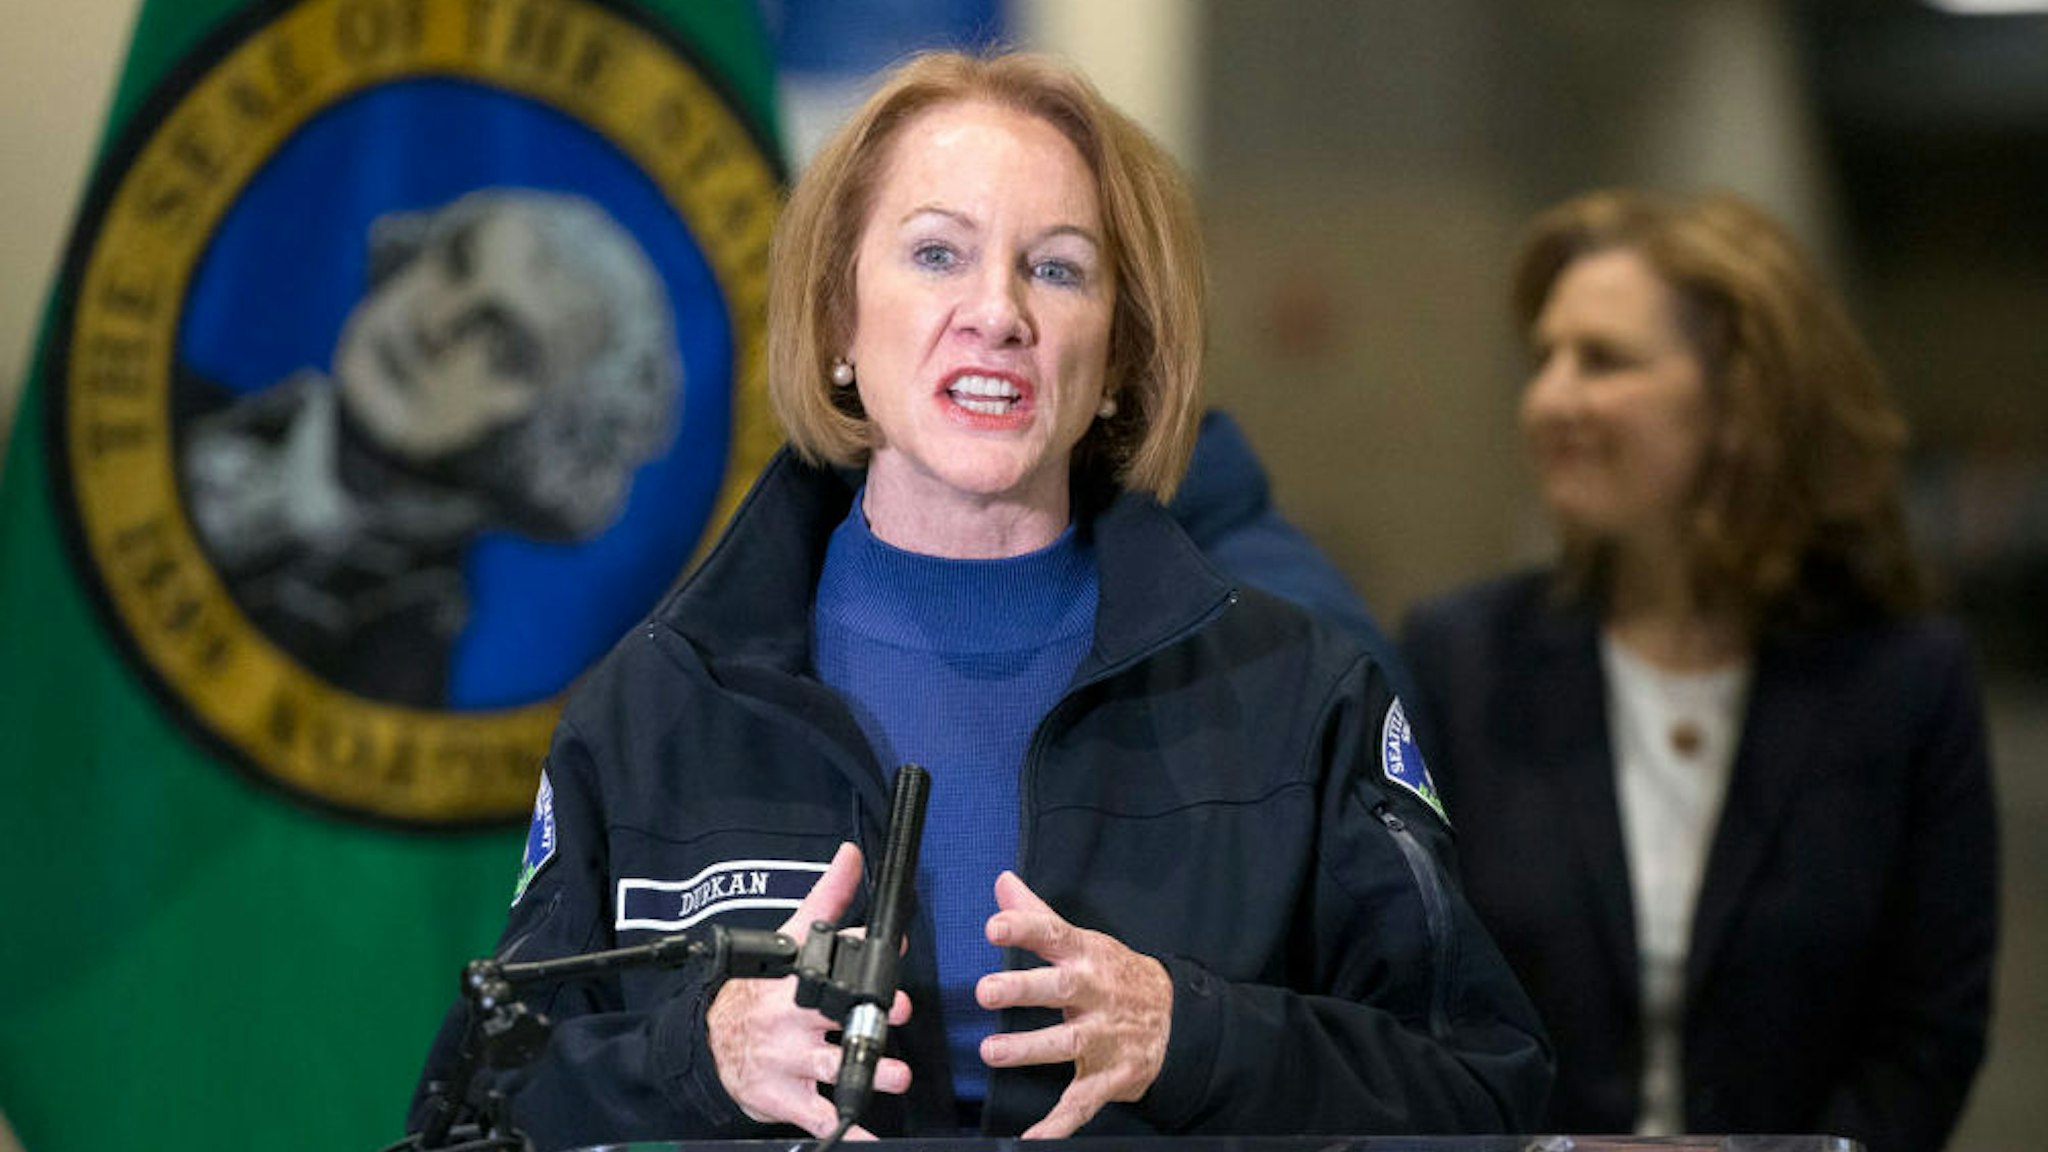 Seattle Mayor jenny Durkan speaks at a press conference on March 28, 2020 in Seattle, Washington. The mayor and other leaders from Washington state discussed the deployment of a new field hospital at CenturyLink Field Event Center which is expected to create at least 150 hospital beds for non-COVID-19 cases and will include 300 soldiers from the 627th Army Hospital at Fort Carson, Colorado. (Photo by Karen Ducey/Getty Images)